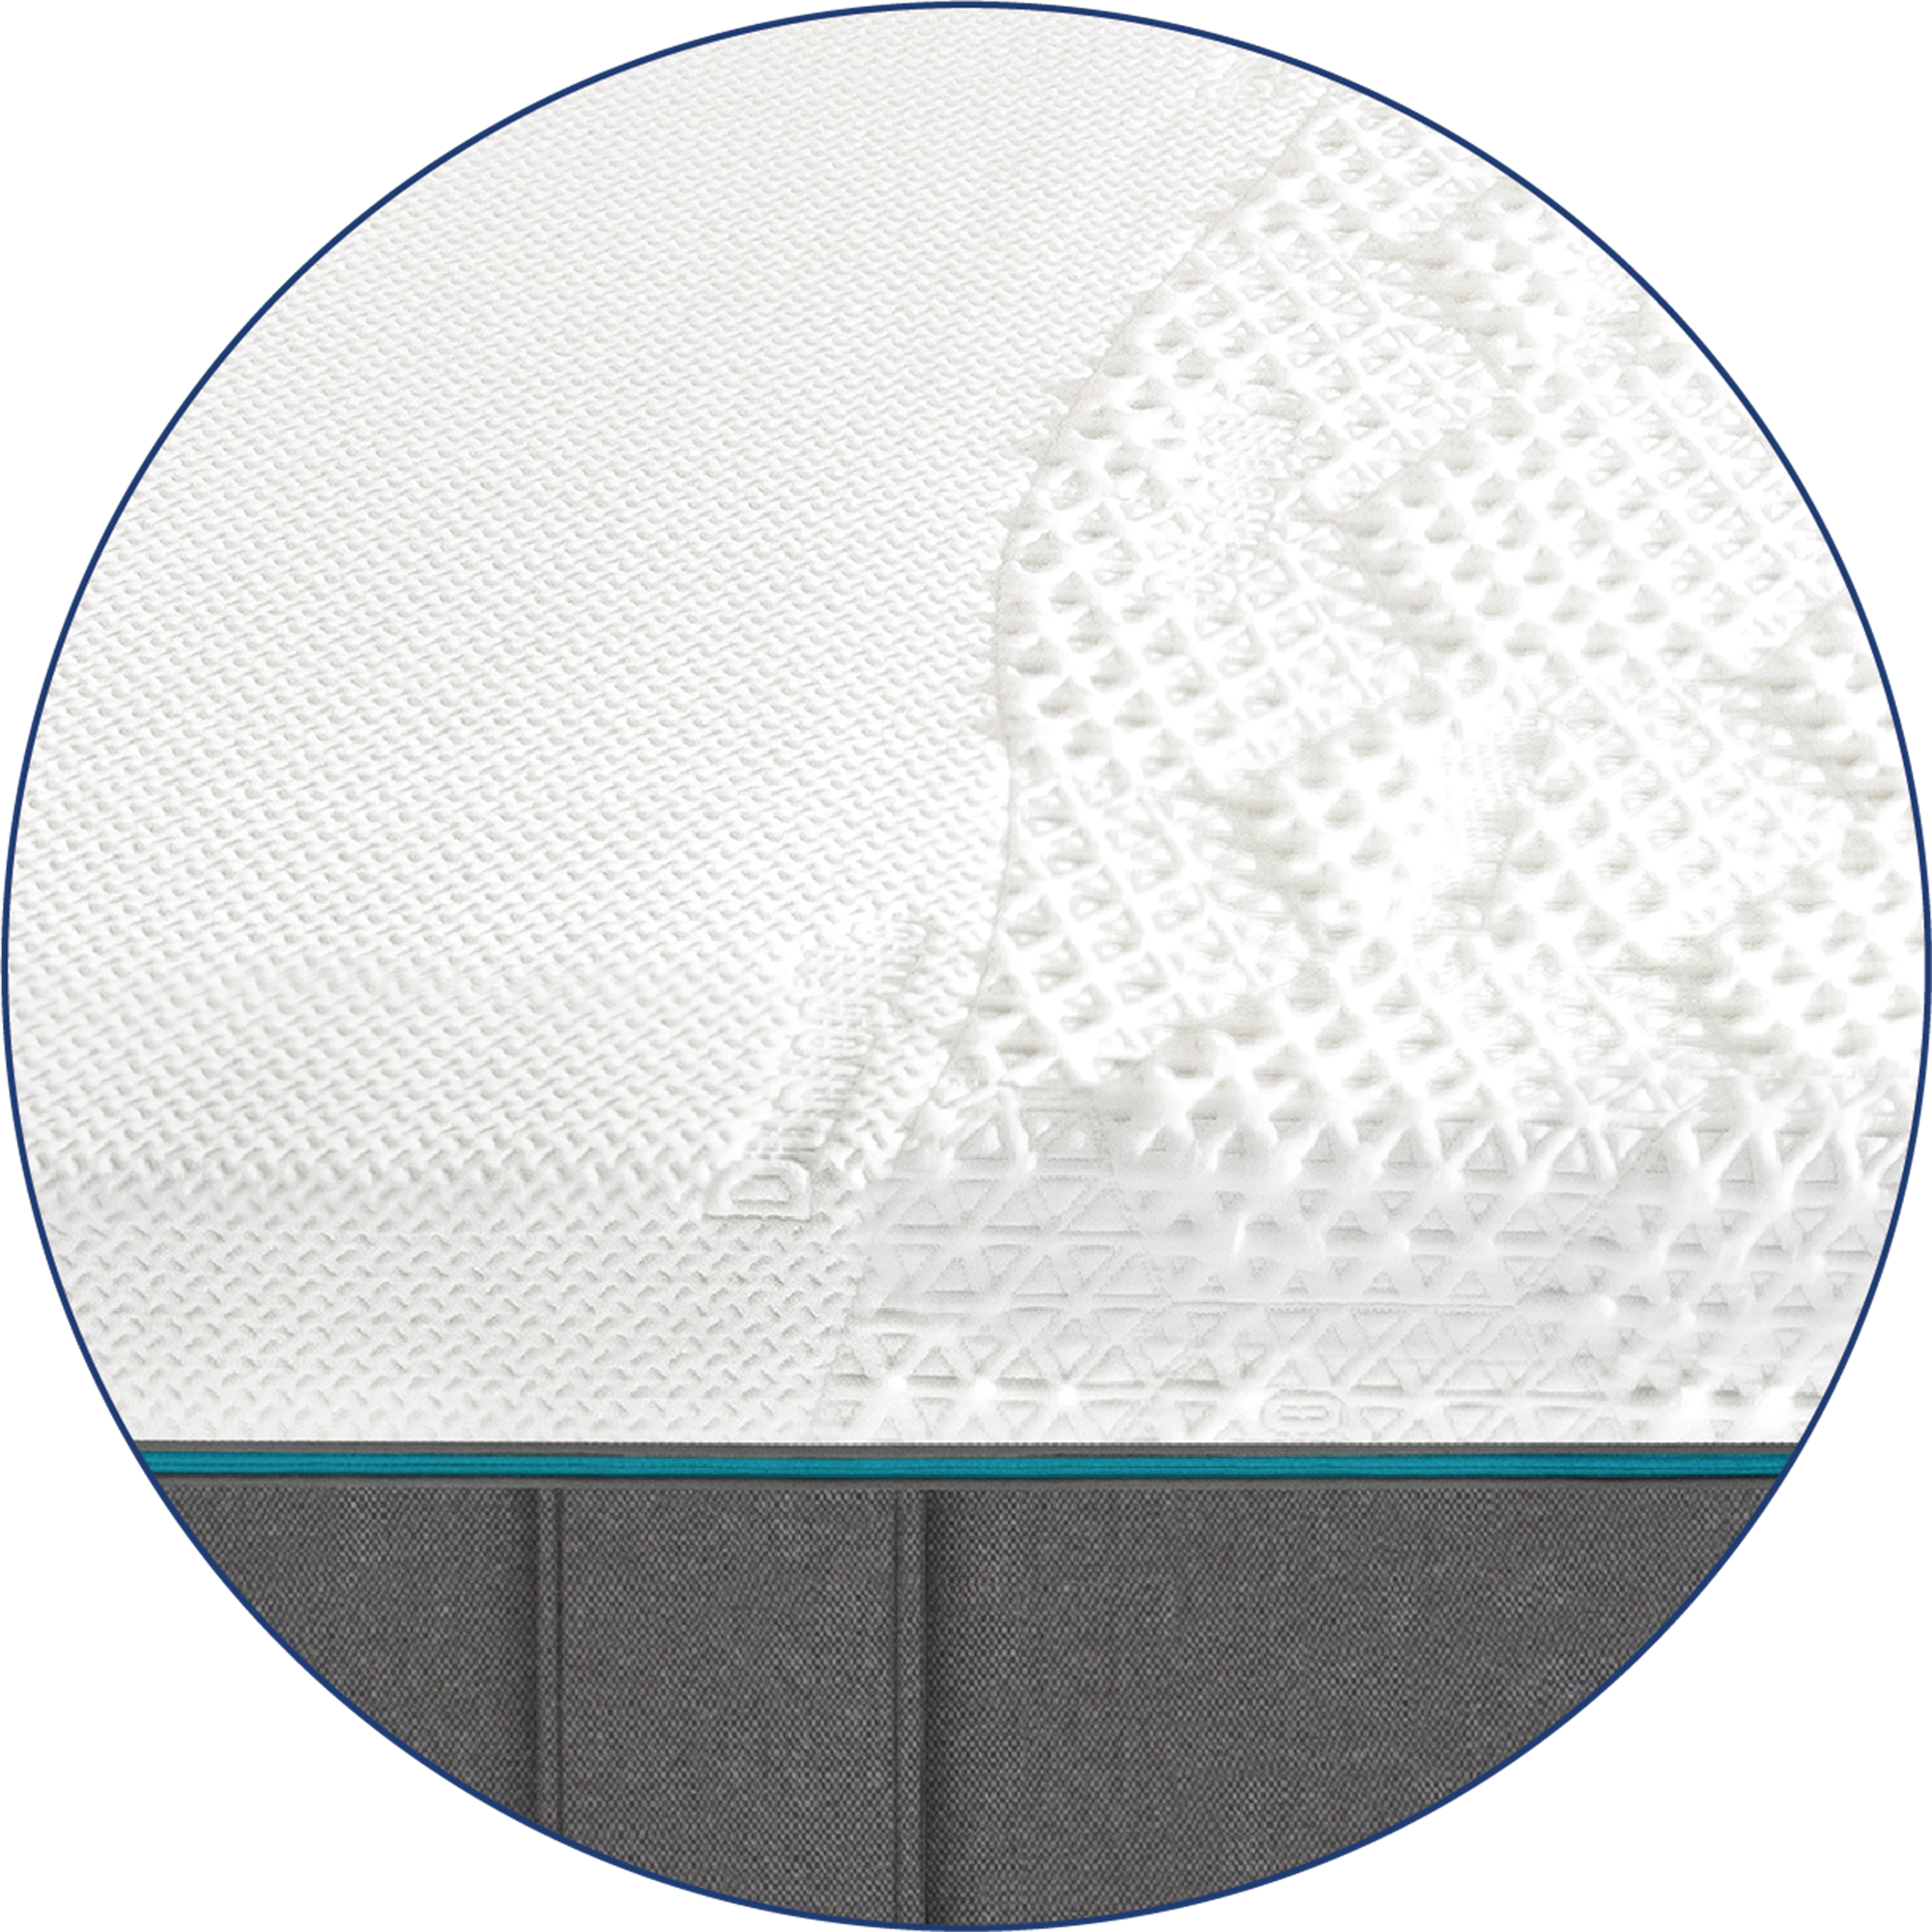 Sense! Incredible breathability
Airflow vents ensure exceptional breathability
Advanced body support
Continuous zoning guarantees a high level of pressure relief and body contouring
Ideal for restless sleepers